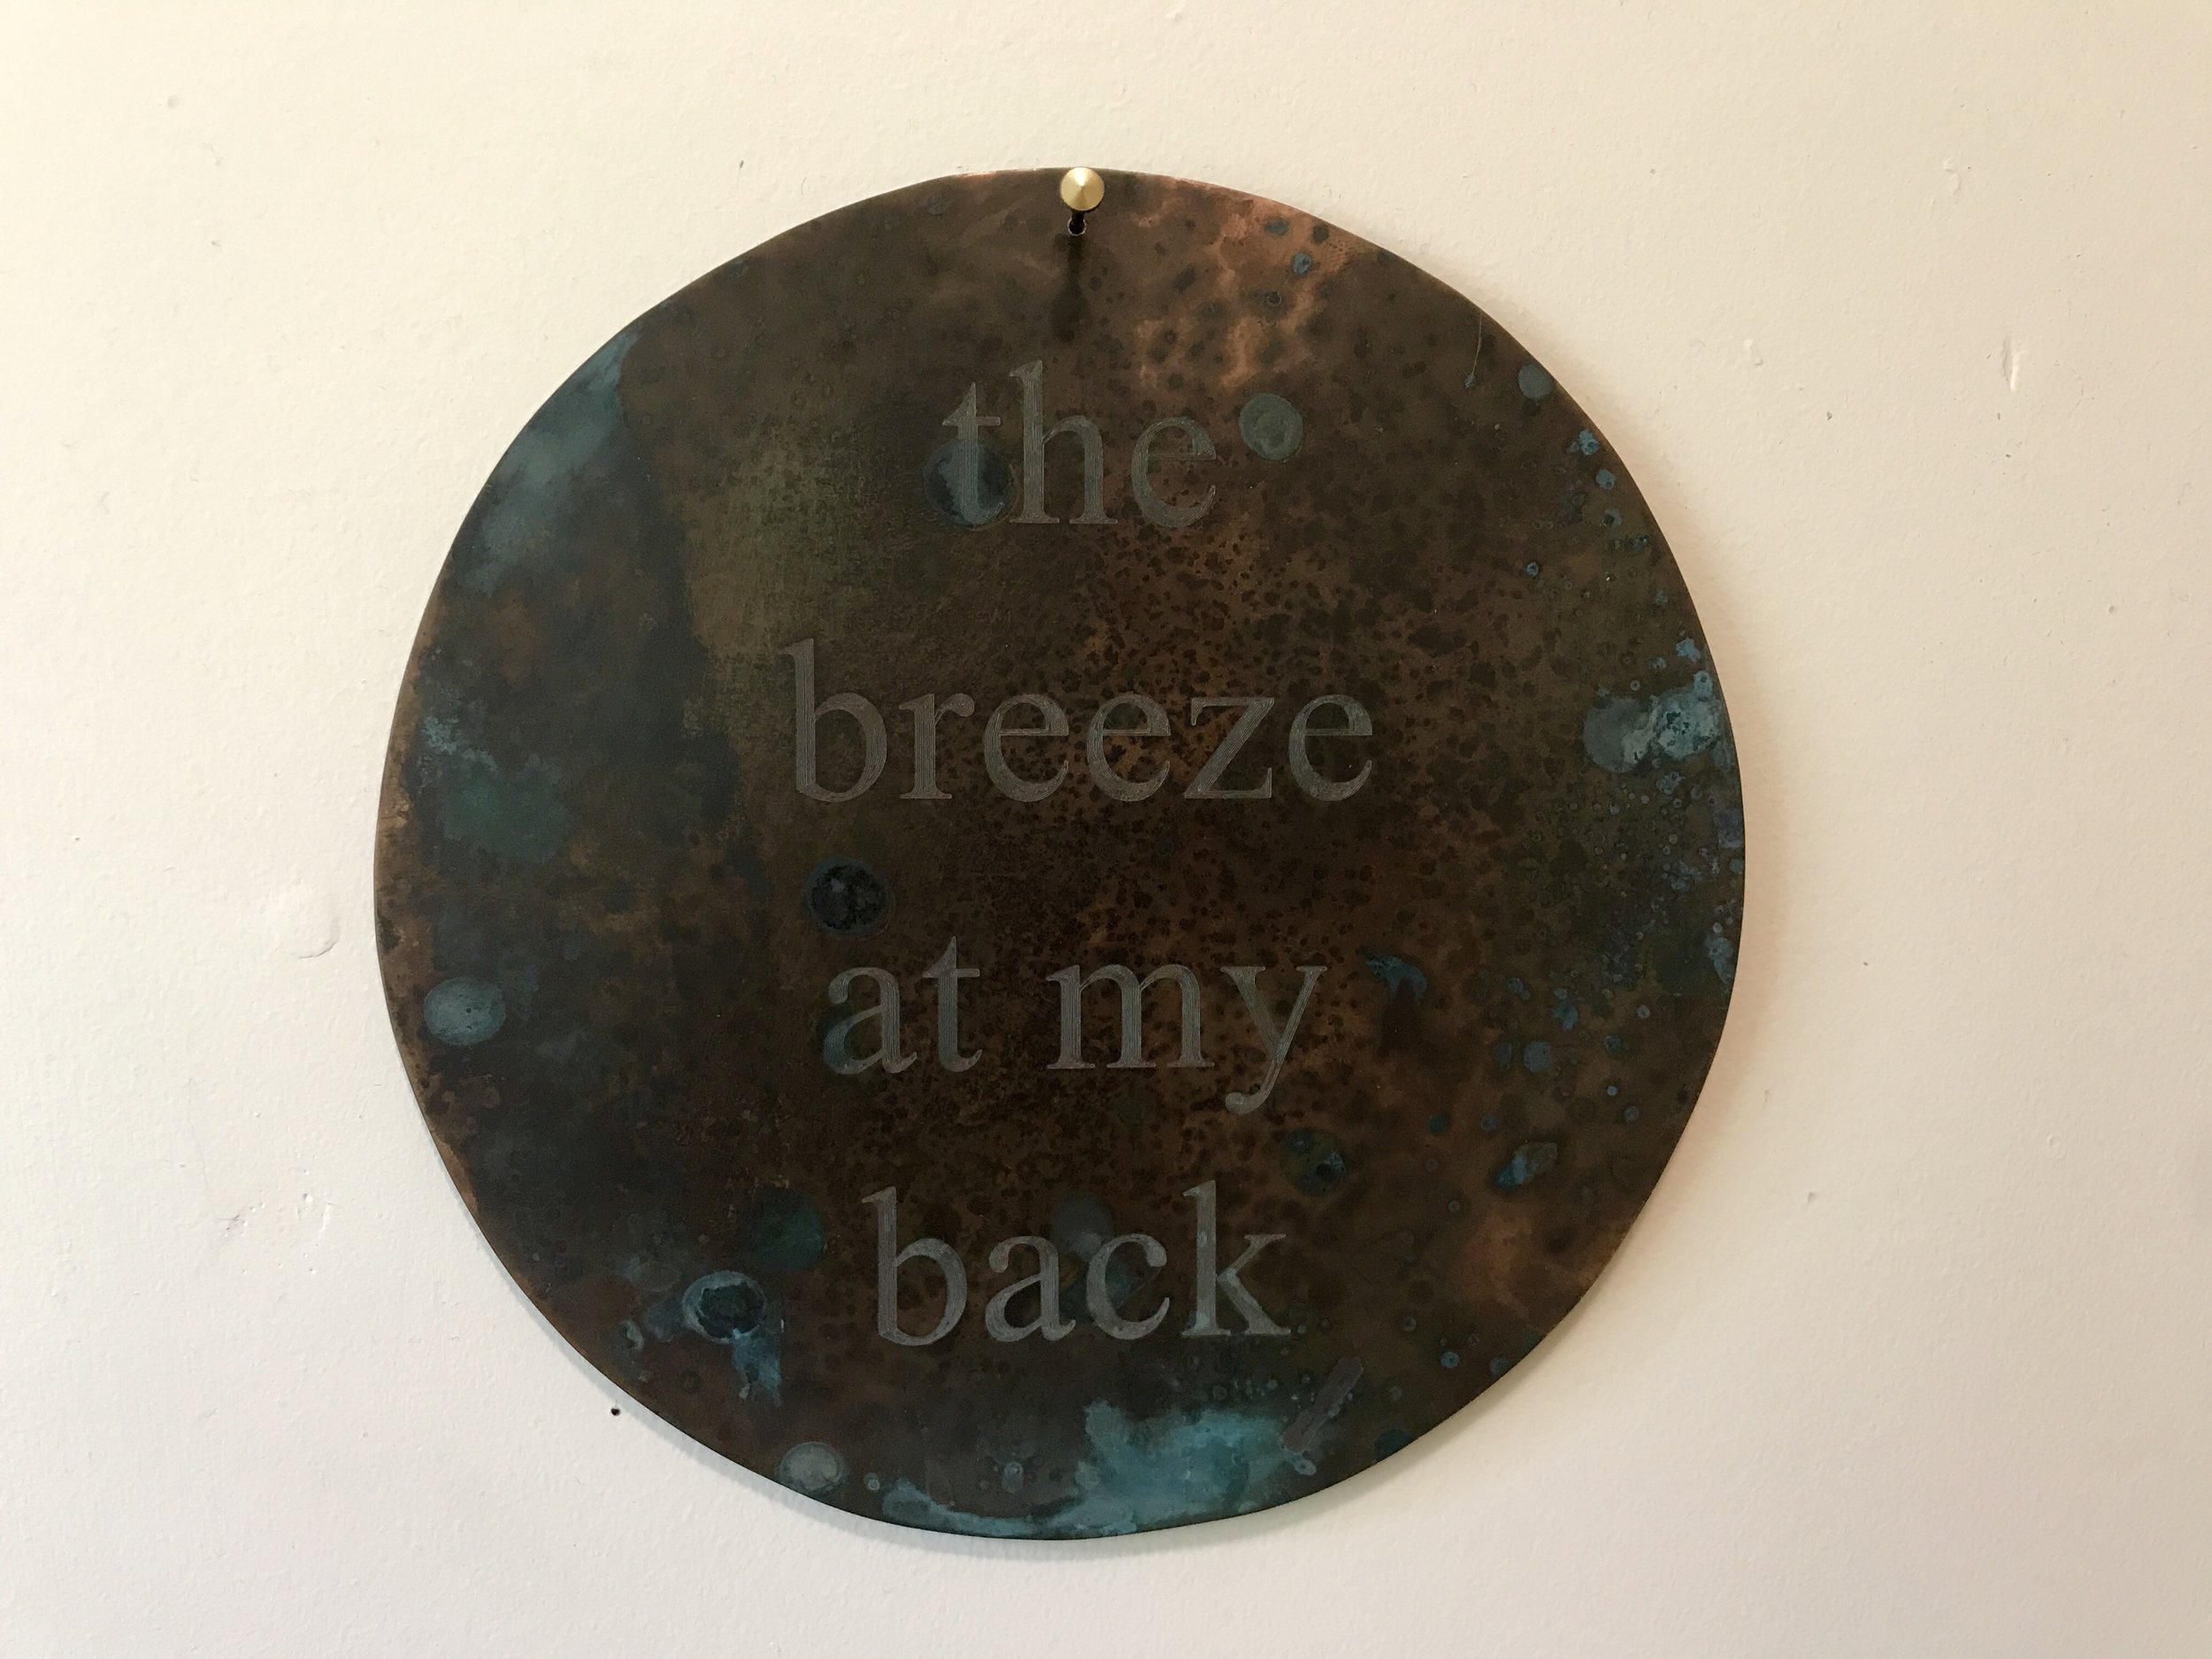 A Memorial to the Breeze, 2002-19, AP, patinated copper